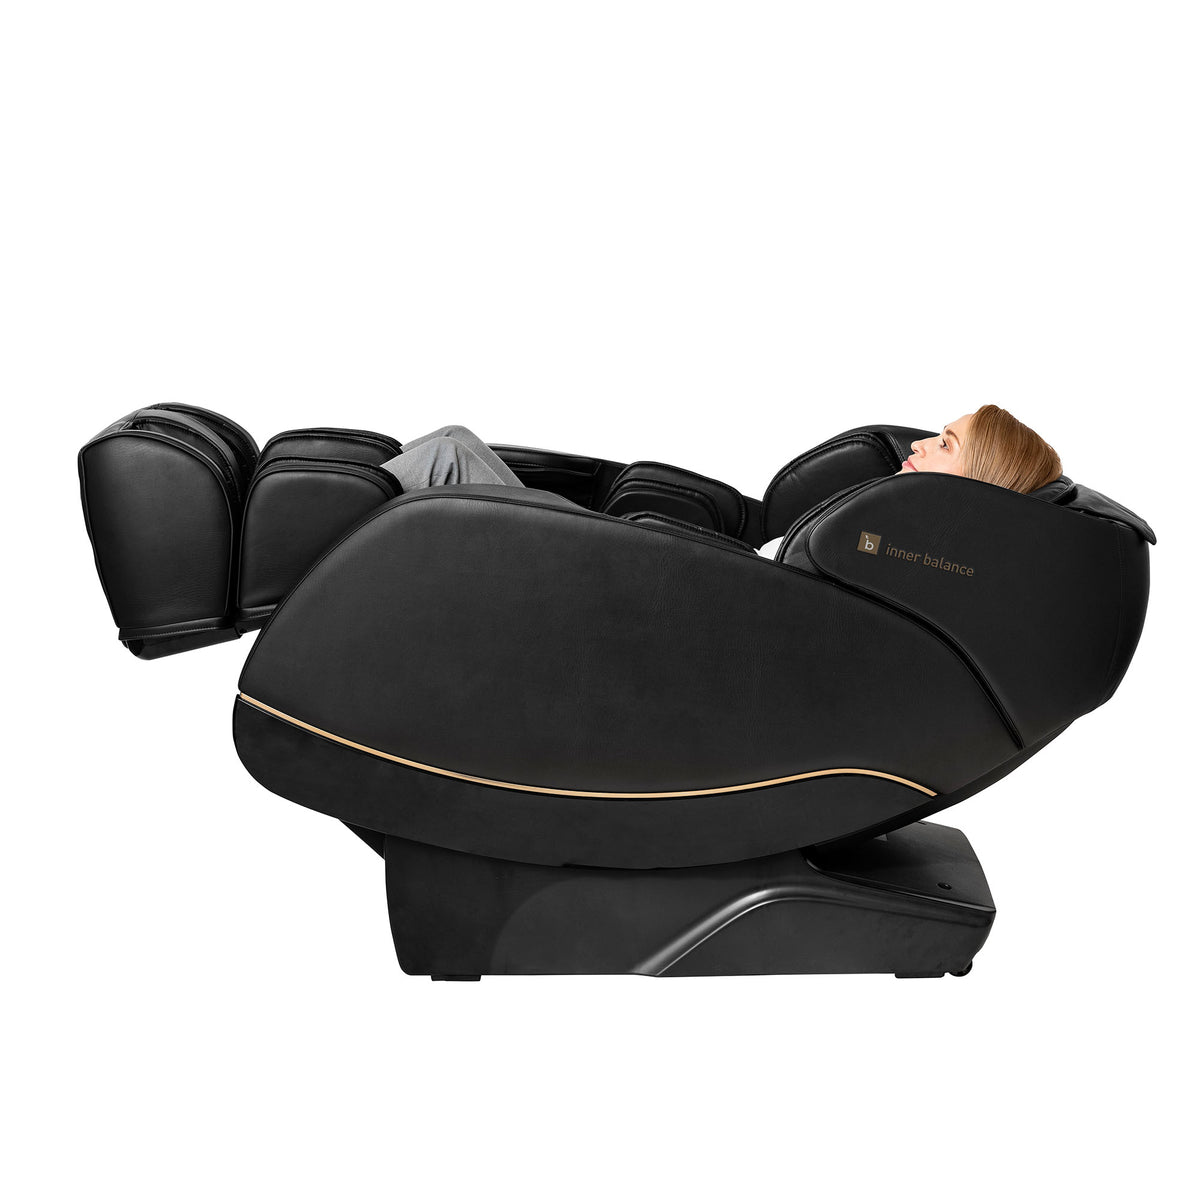 Side view of a person relaxing in a fully zero-gravity reclined Inner Balance Wellness Jin 2.0 Massage Chair in classic black with gold trimming